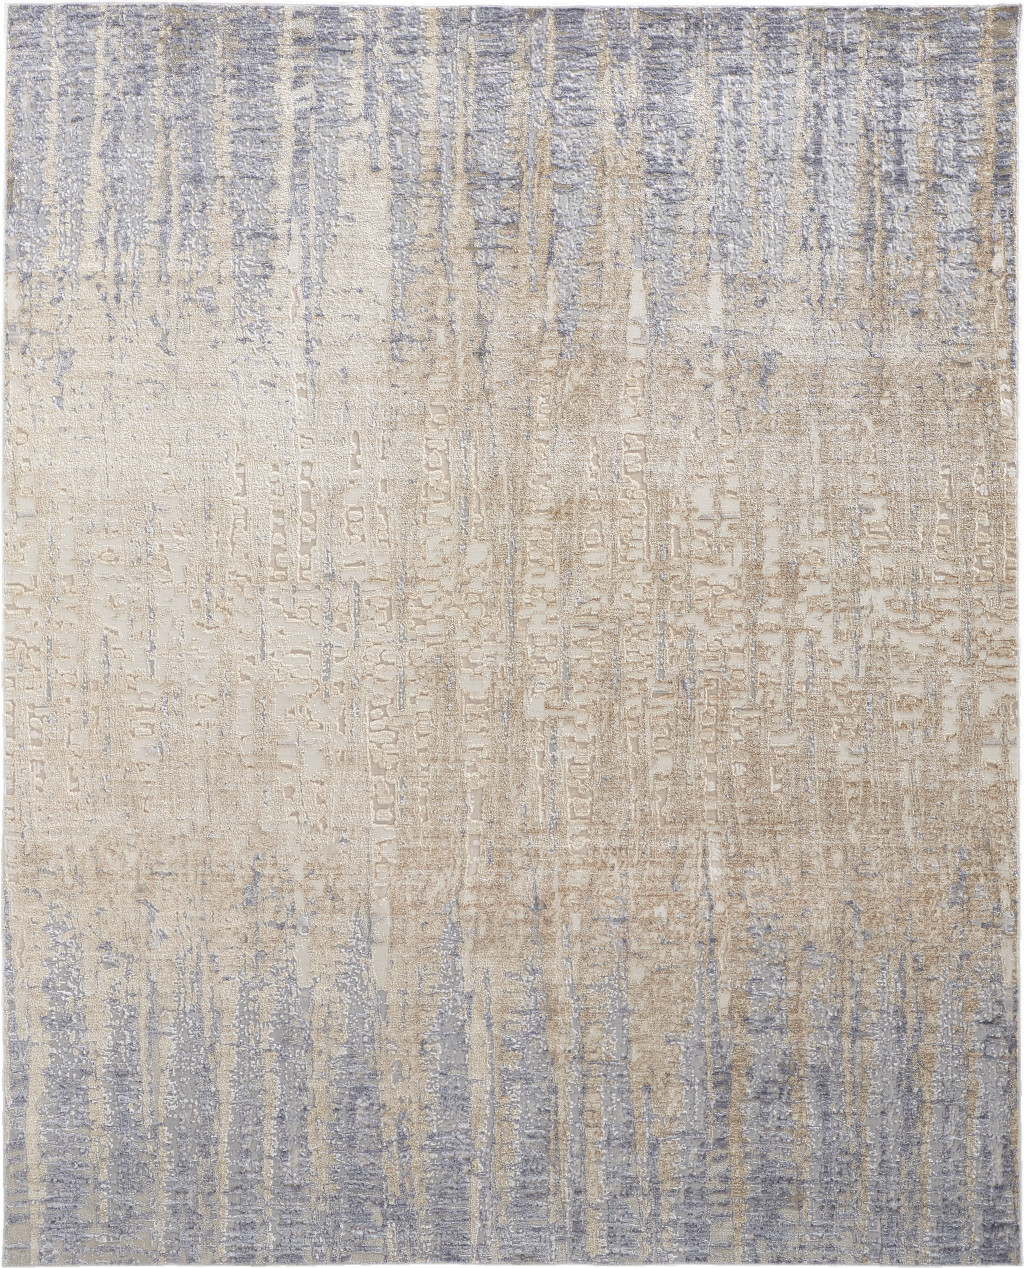 8' X 10' Tan Brown And Blue Abstract Power Loom Distressed Area Rug-514187-1